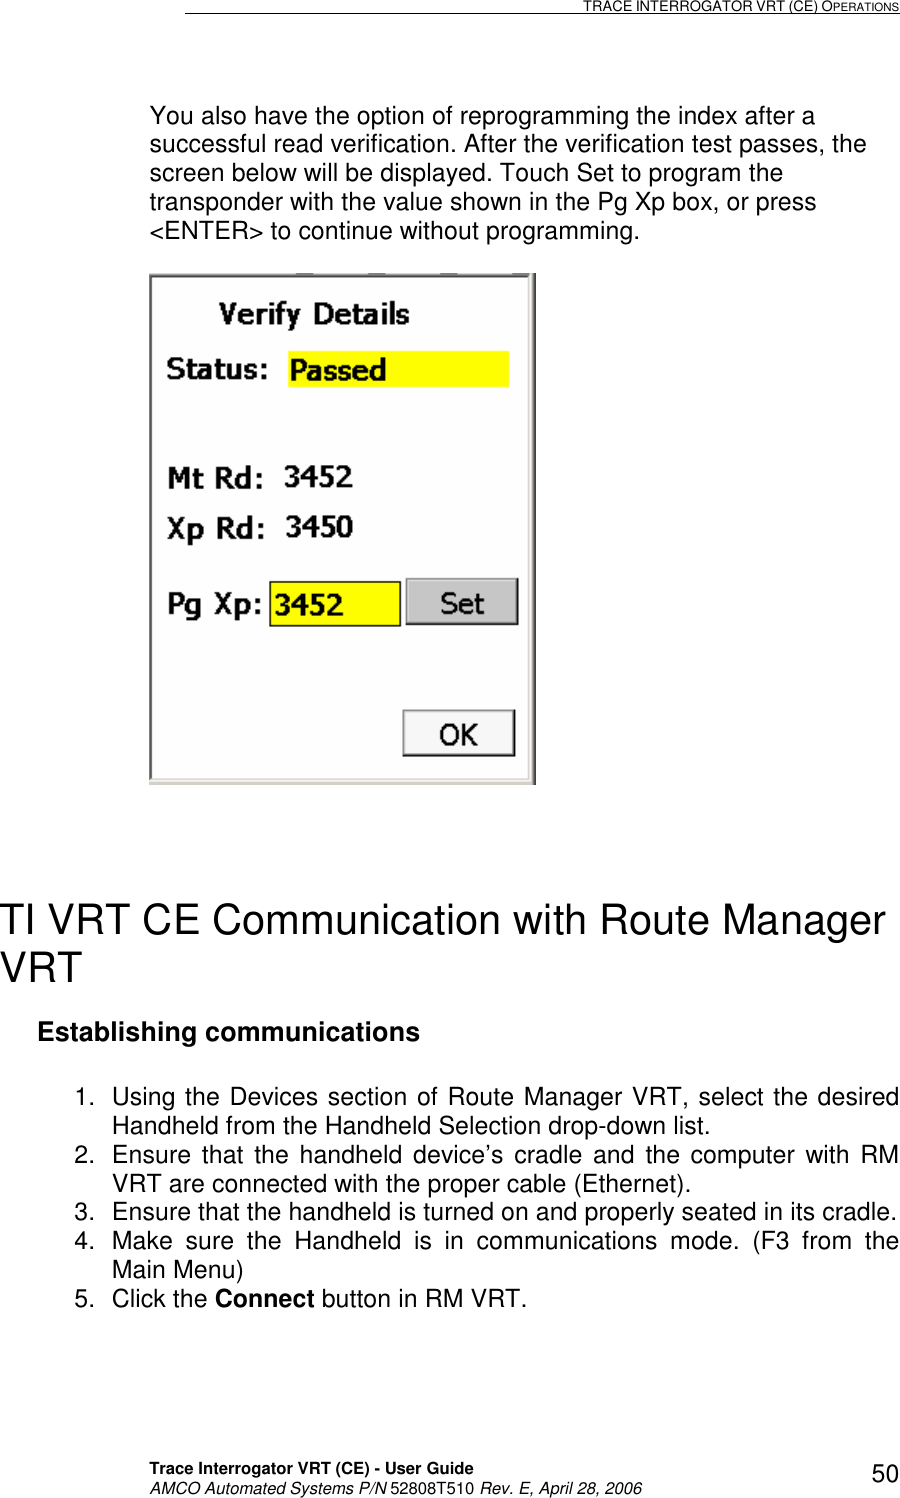                                                                                                                              TRACE INTERROGATOR VRT (CE) OPERATIONS    Trace Interrogator VRT (CE) - User Guide   AMCO Automated Systems P/N 52808T510 Rev. E, April 28, 2006 50You also have the option of reprogramming the index after a successful read verification. After the verification test passes, the screen below will be displayed. Touch Set to program the transponder with the value shown in the Pg Xp box, or press &lt;ENTER&gt; to continue without programming.      TI VRT CE Communication with Route Manager VRT Establishing communications  1.  Using the Devices section of Route Manager VRT, select the desired Handheld from the Handheld Selection drop-down list. 2.  Ensure  that  the handheld device’s  cradle  and  the  computer  with RM VRT are connected with the proper cable (Ethernet).  3.  Ensure that the handheld is turned on and properly seated in its cradle. 4.  Make  sure  the  Handheld  is  in  communications  mode.  (F3  from  the Main Menu) 5.  Click the Connect button in RM VRT.  